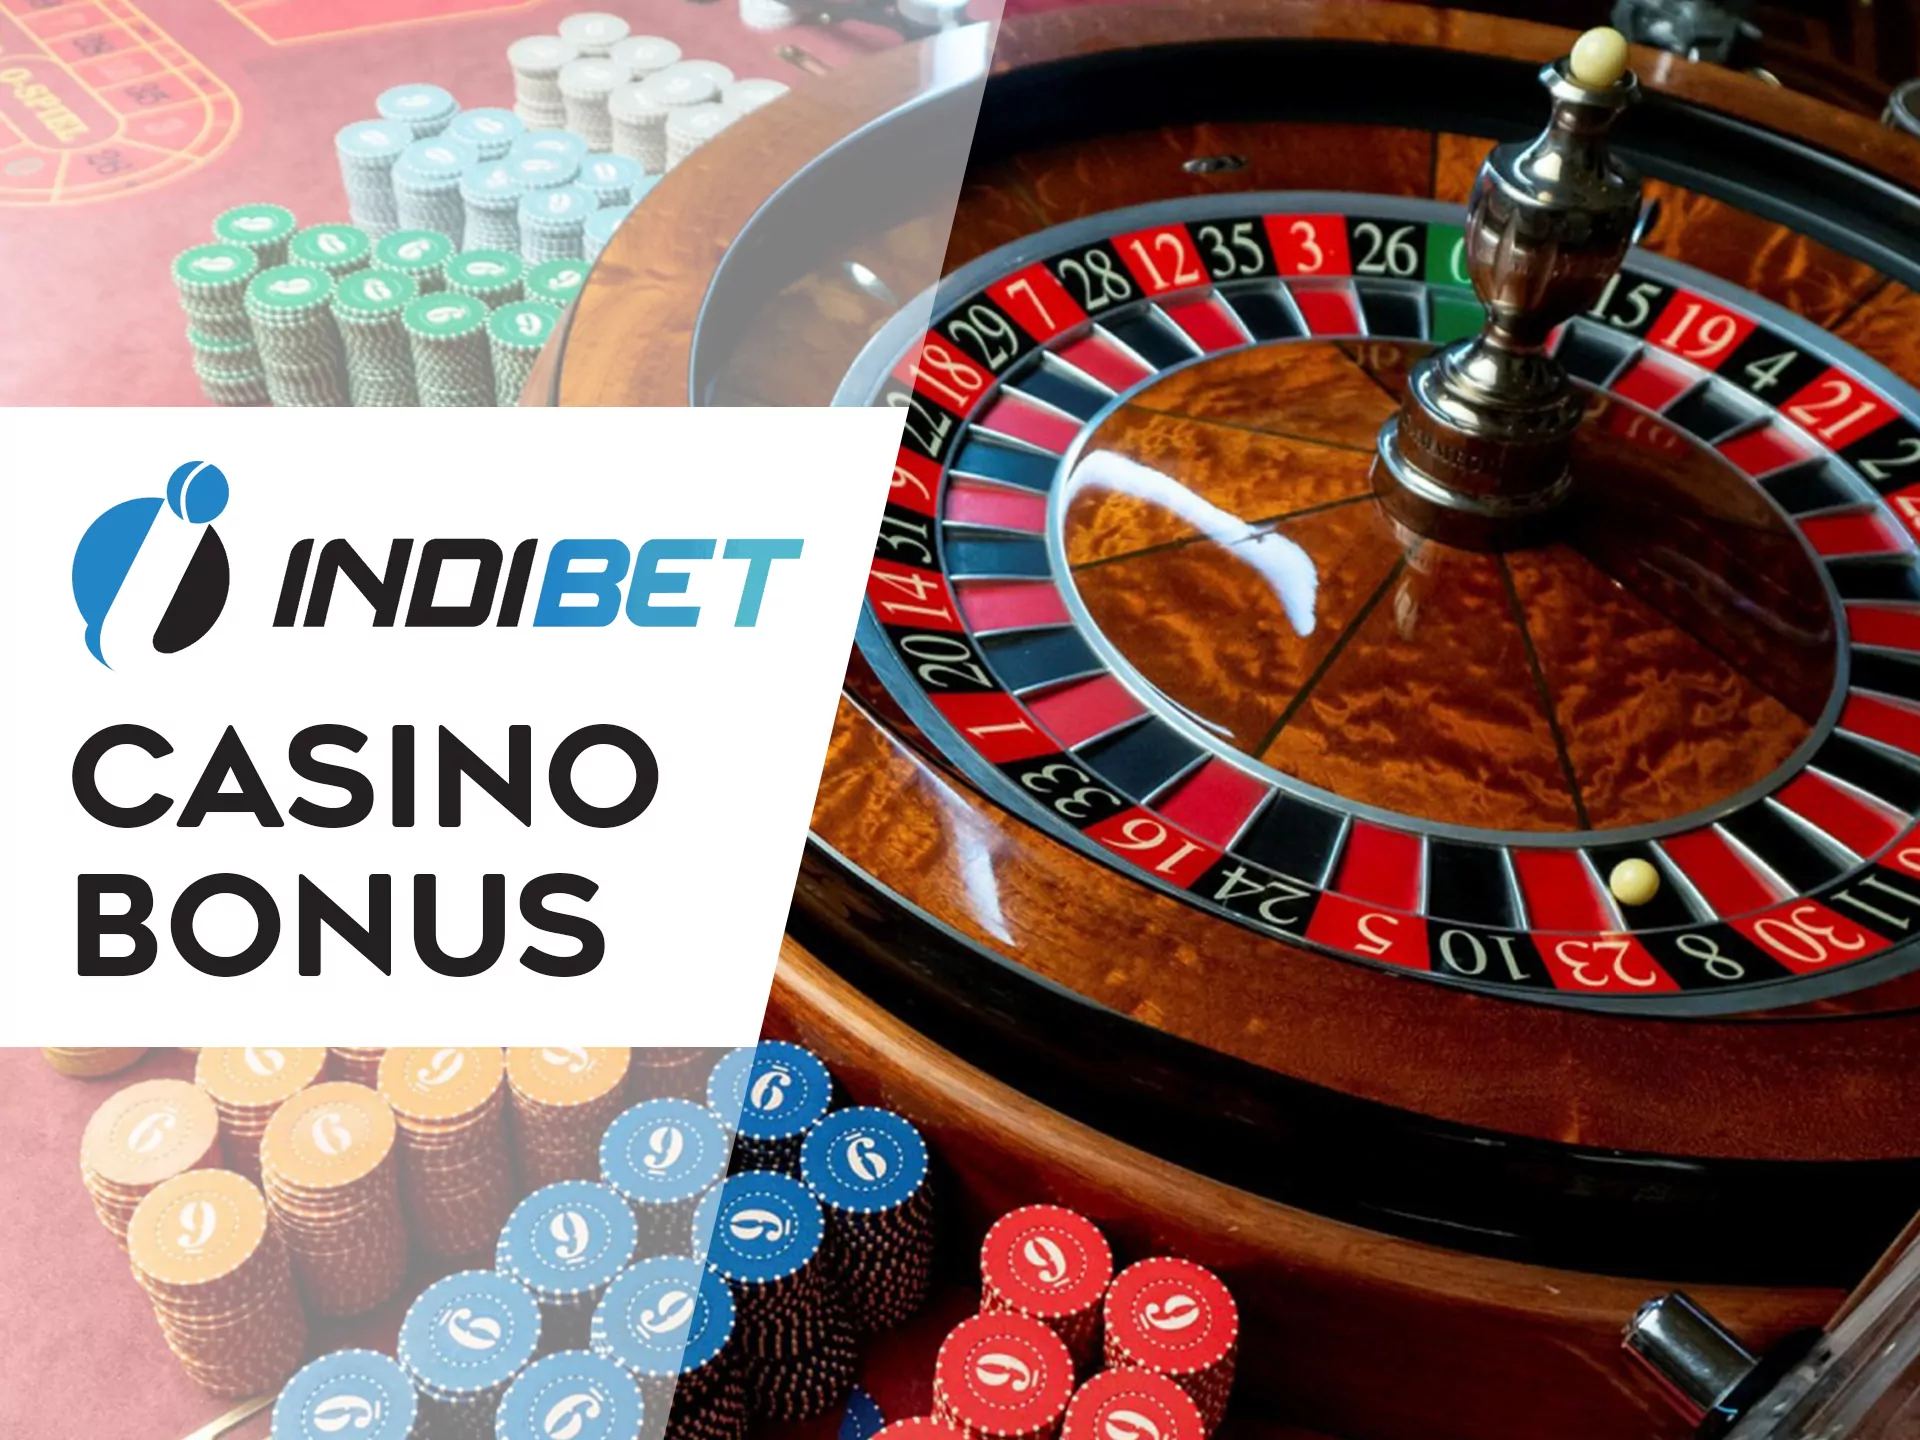 Receive the casino bonus to play games with an advantsge.